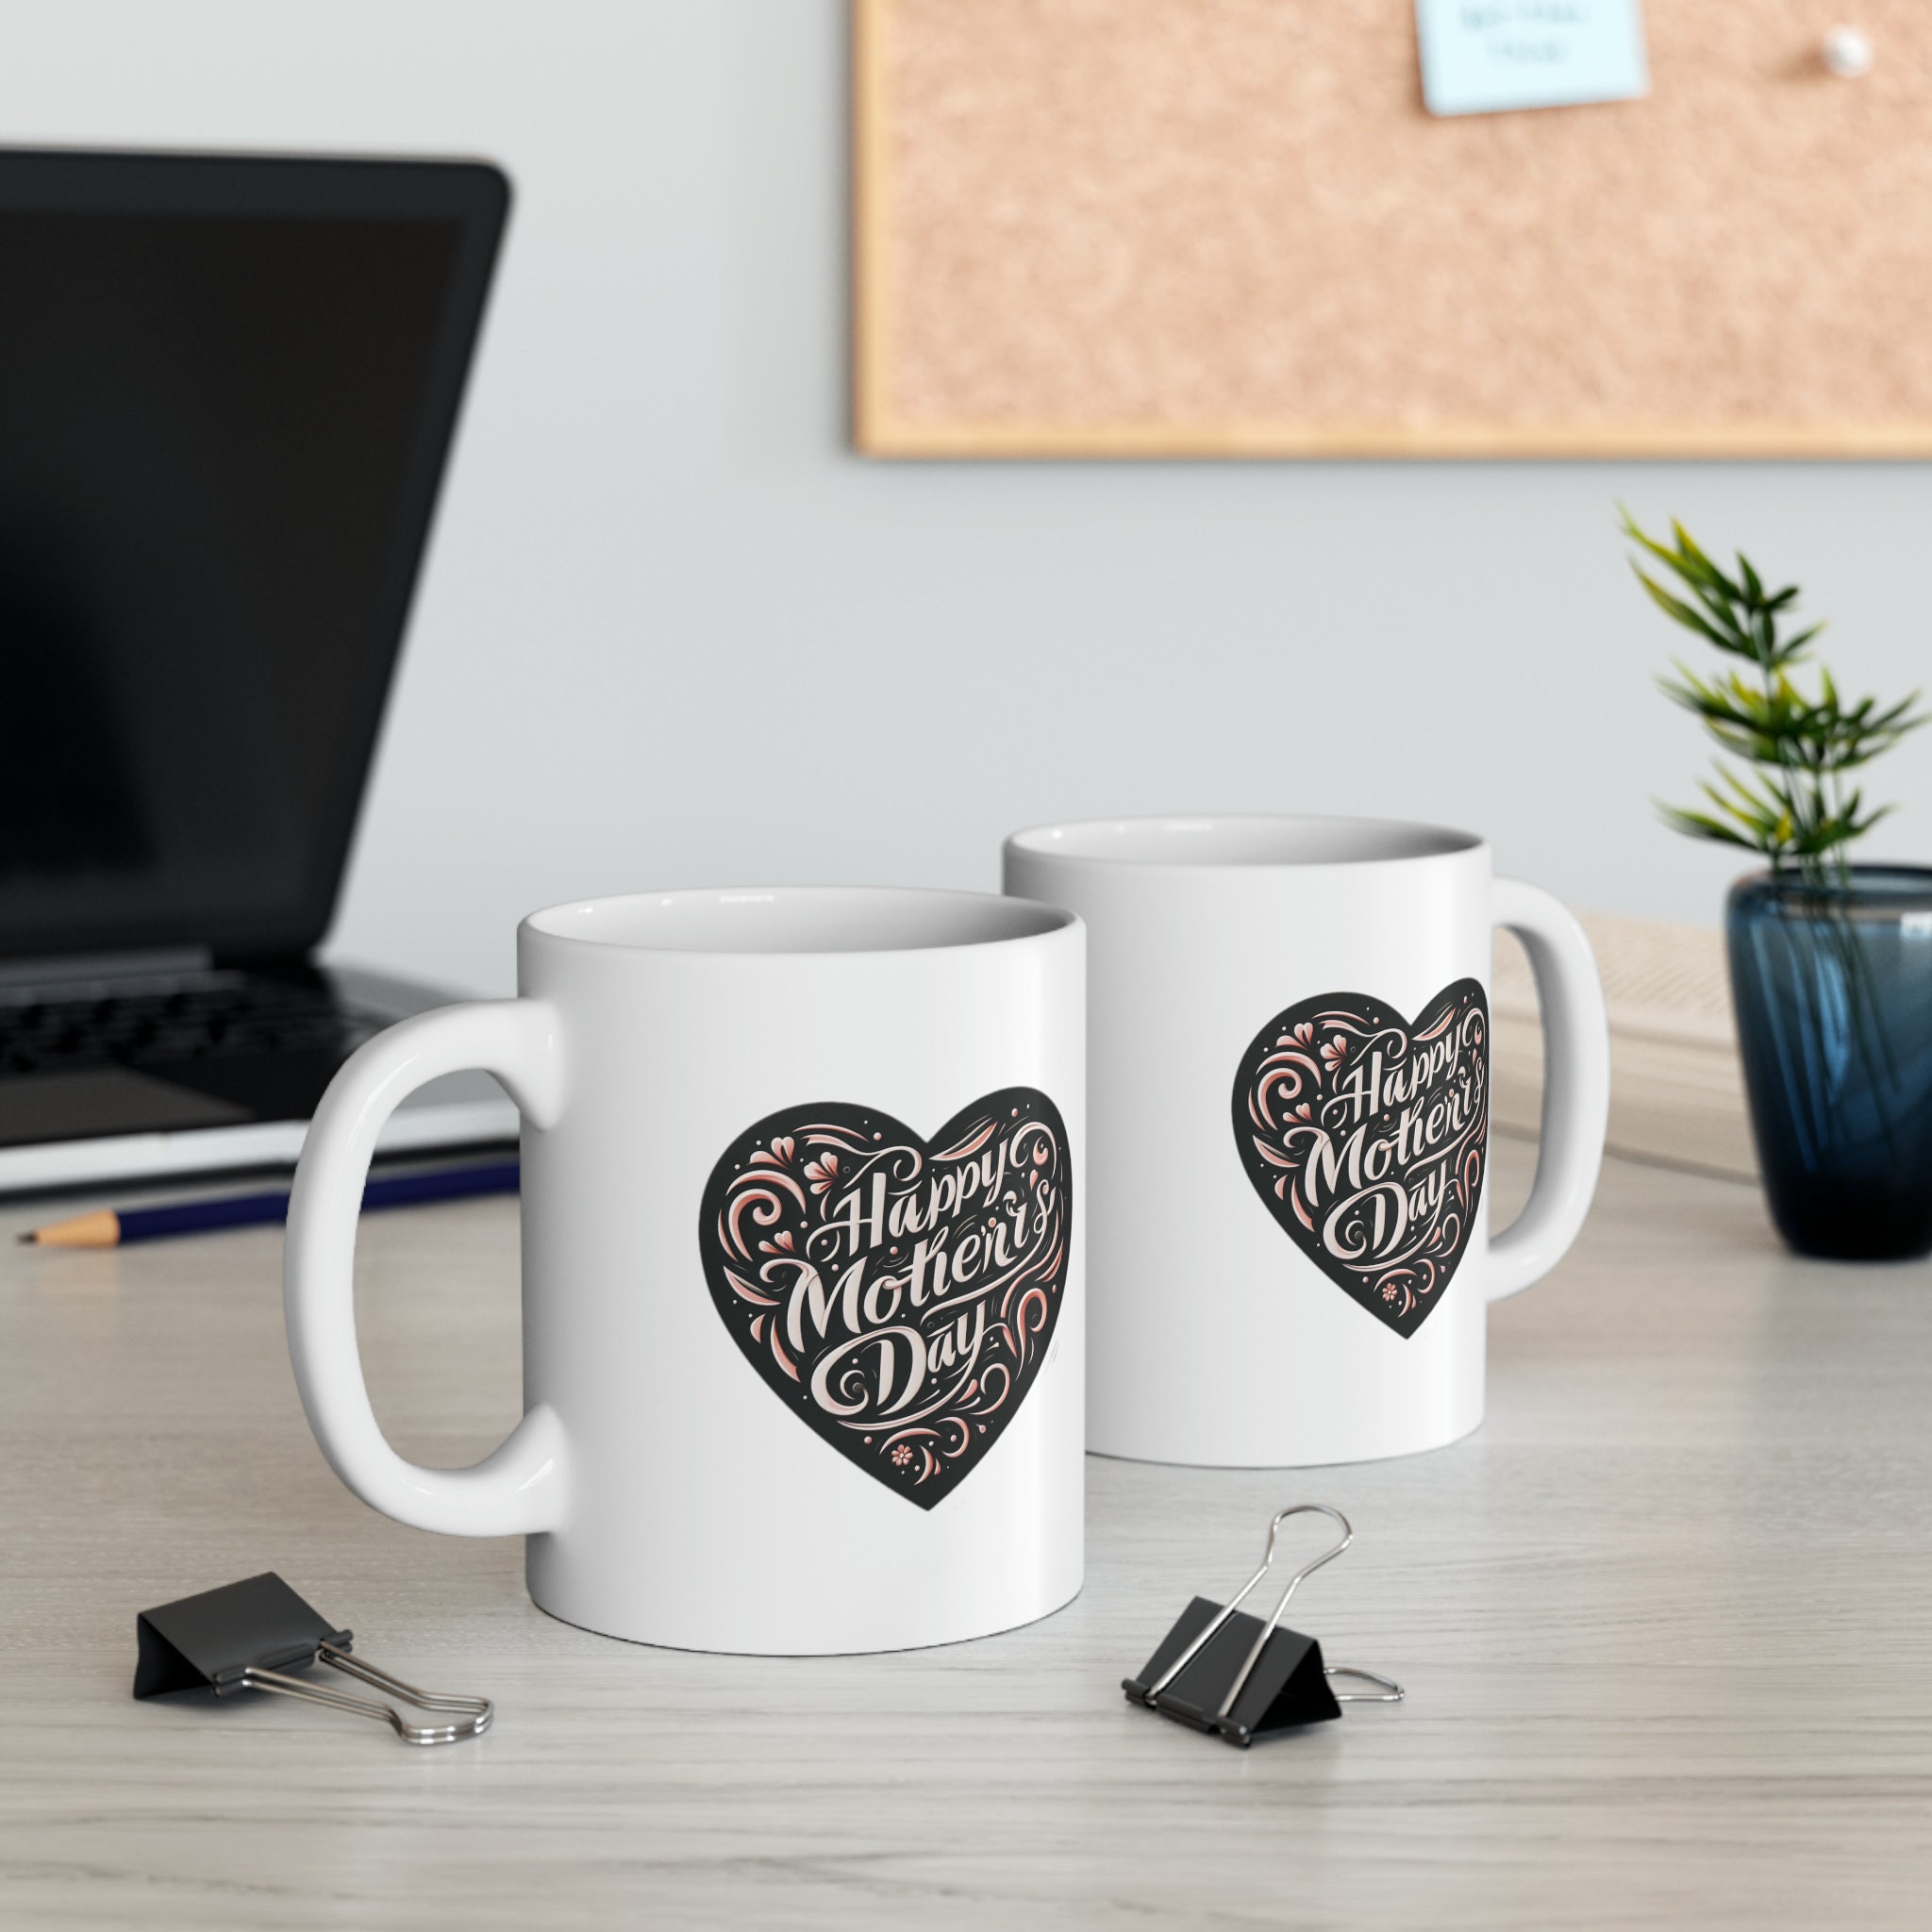 Happy mother' day - Coffee Mug for Mother's day